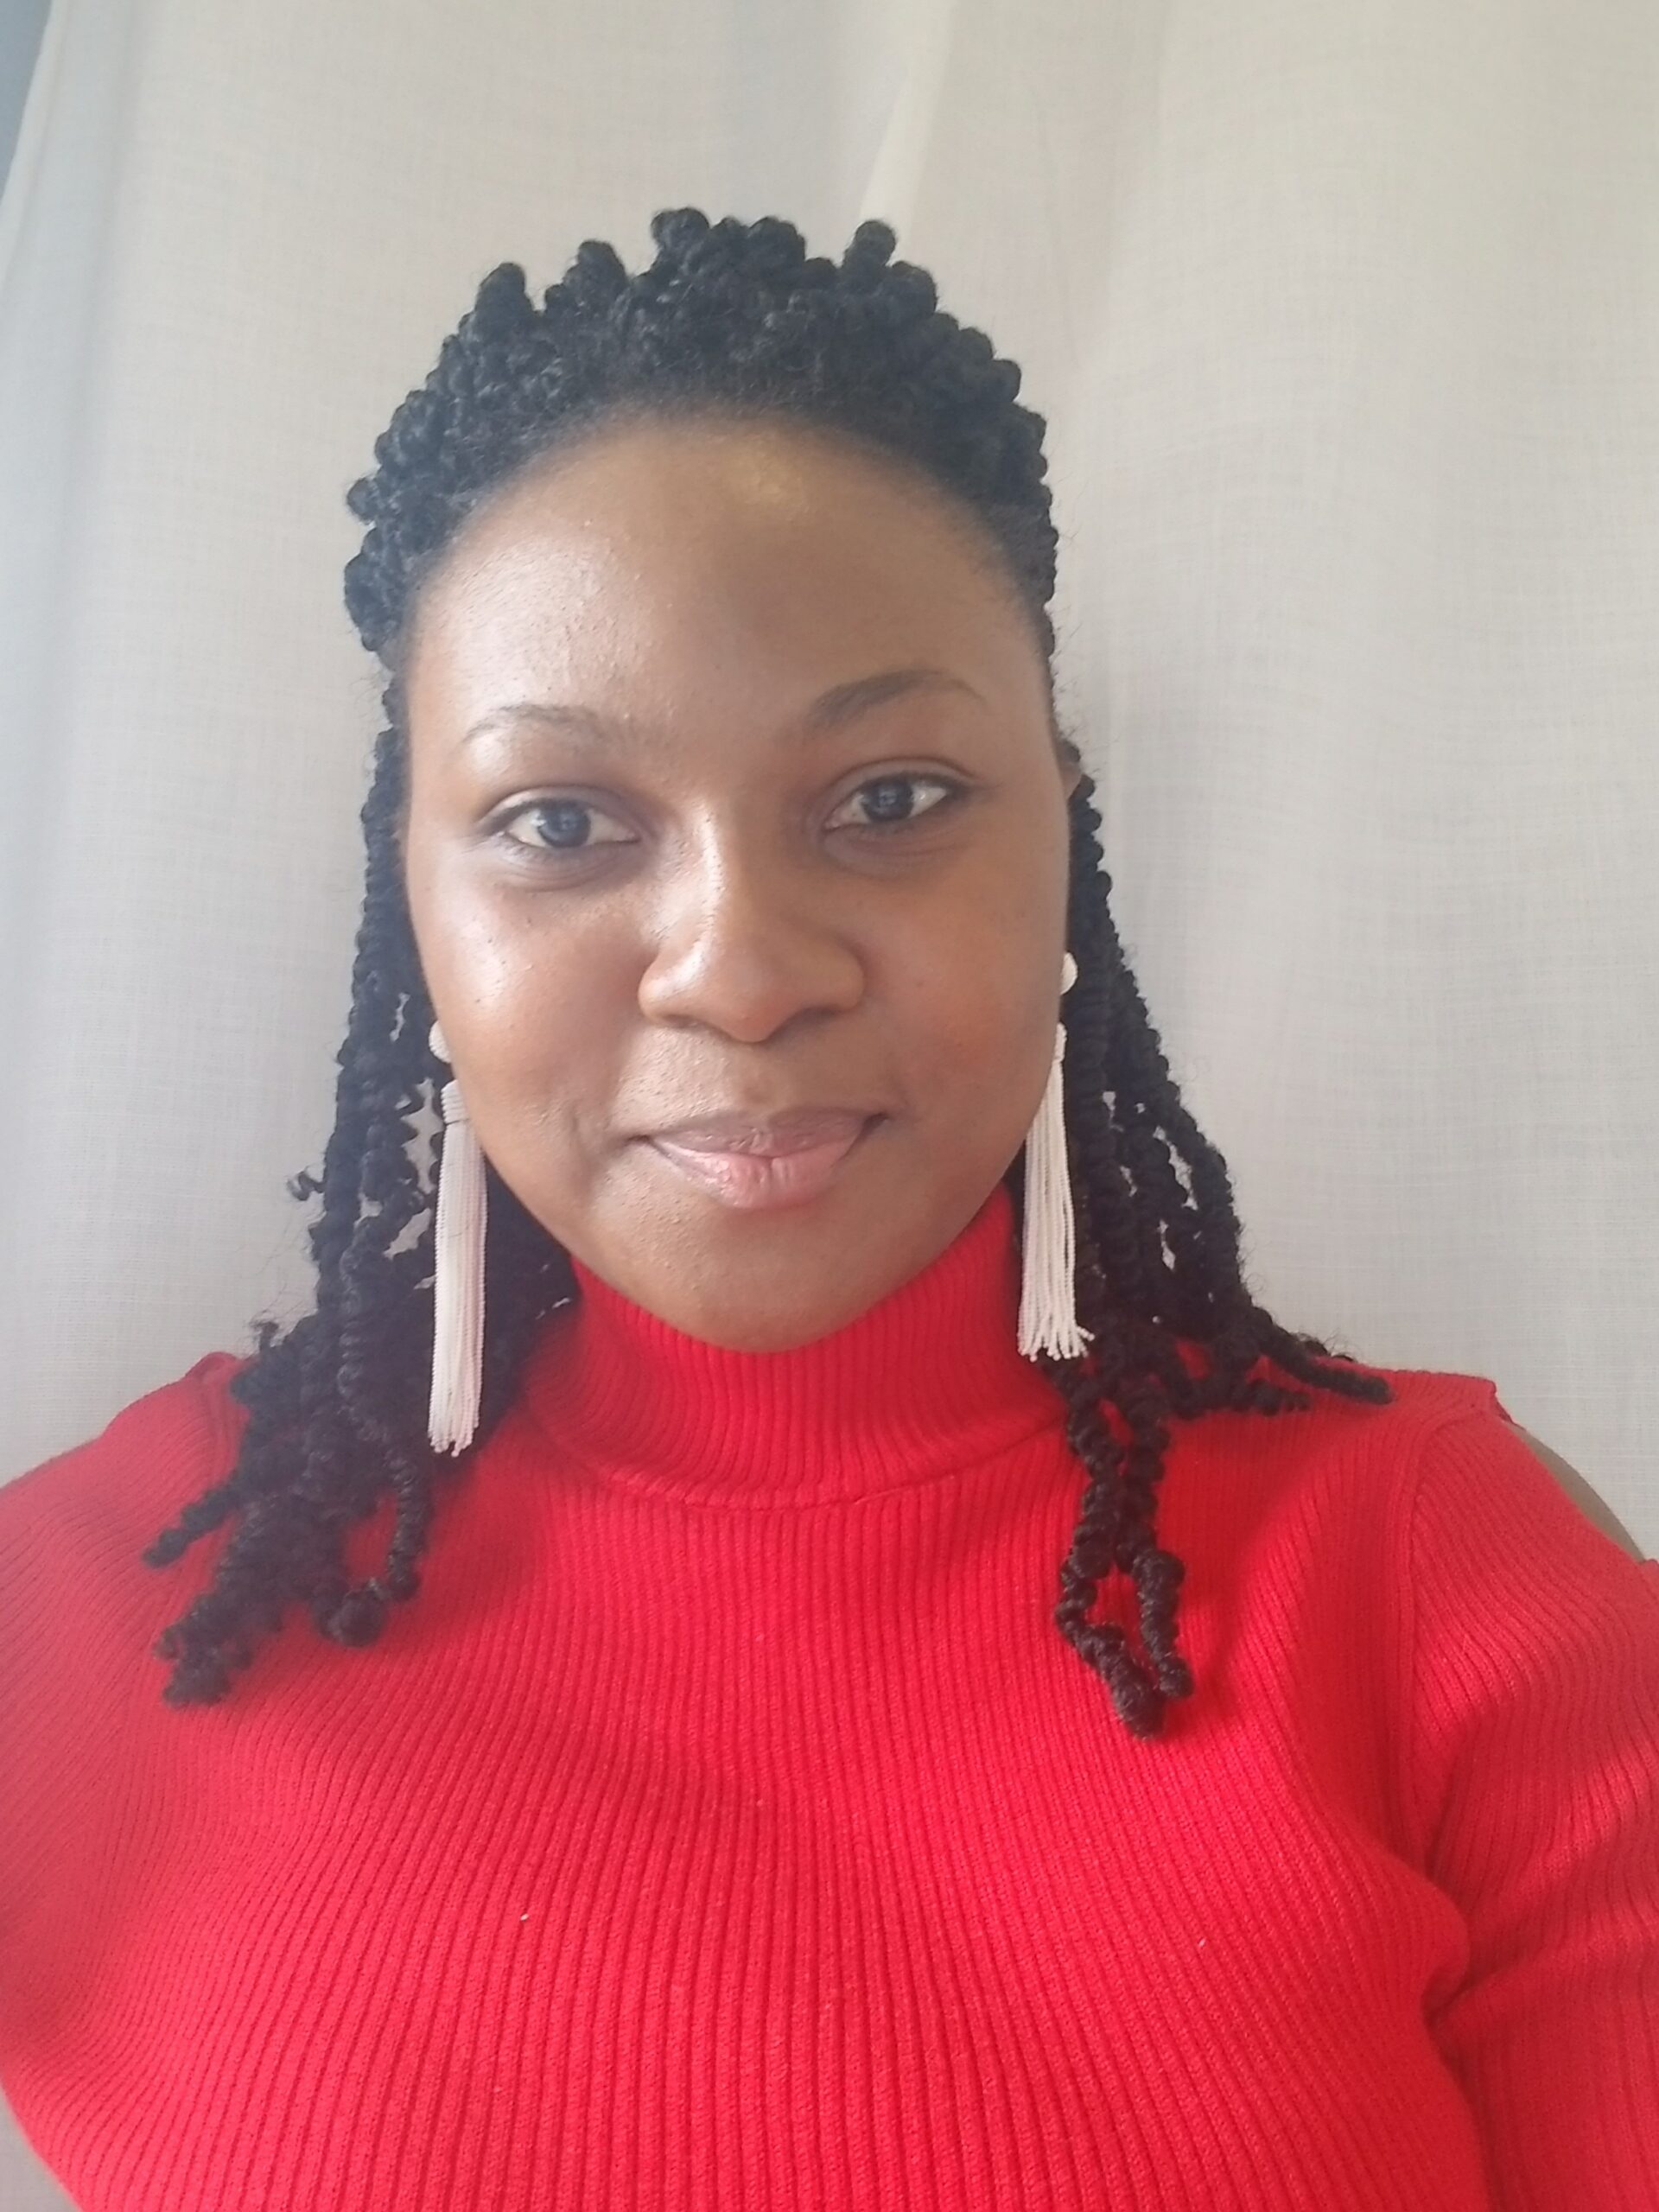 Picture of young black girl smiling into camera with braids, shiny dangling earrings and a red turtleneck.